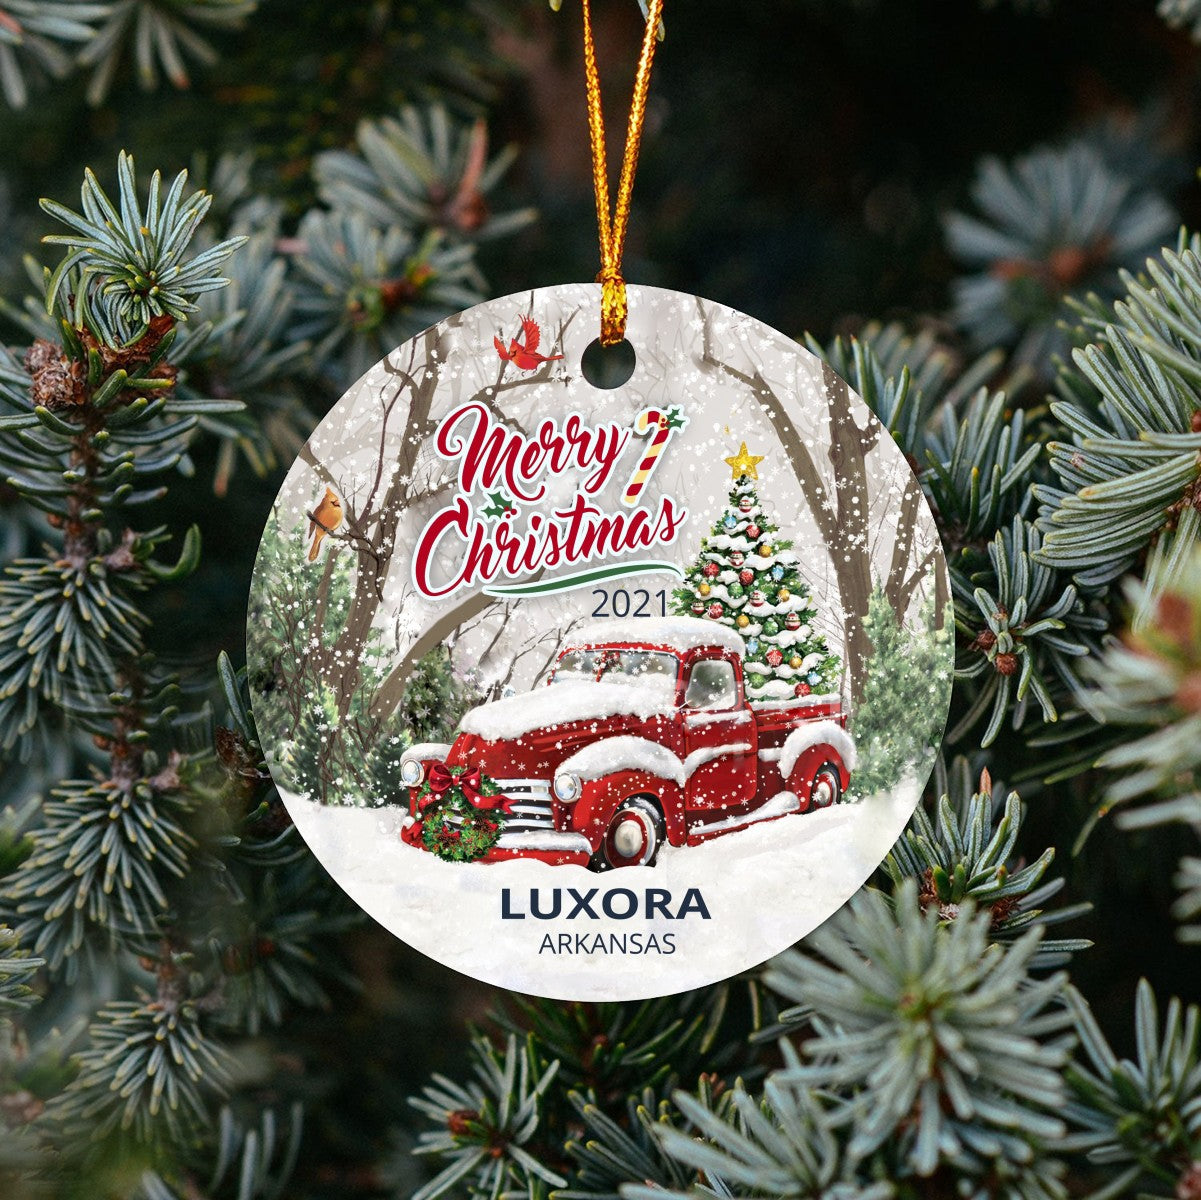 Christmas Tree Ornaments Luxora - Ornament With Name City, State Luxora Arkansas AR Ornament - Red Truck Xmas Ornaments 3'' Plastic Gift For Family, Friend And Housewarming